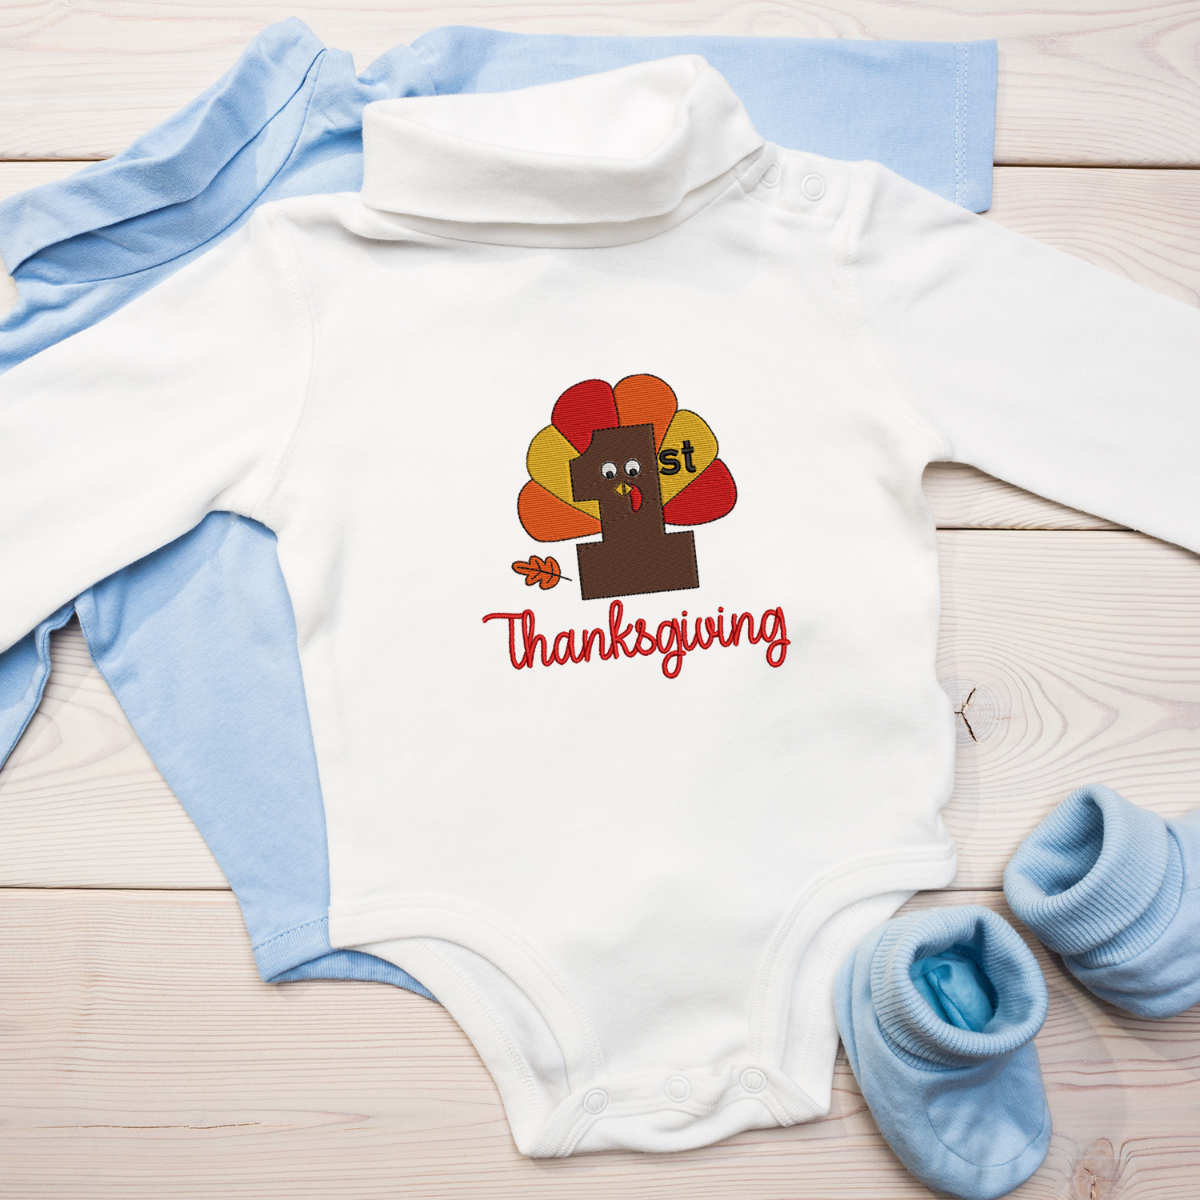 1st Thanksgiving 2020 Embroidery Design - Oh My Crafty Supplies Inc.